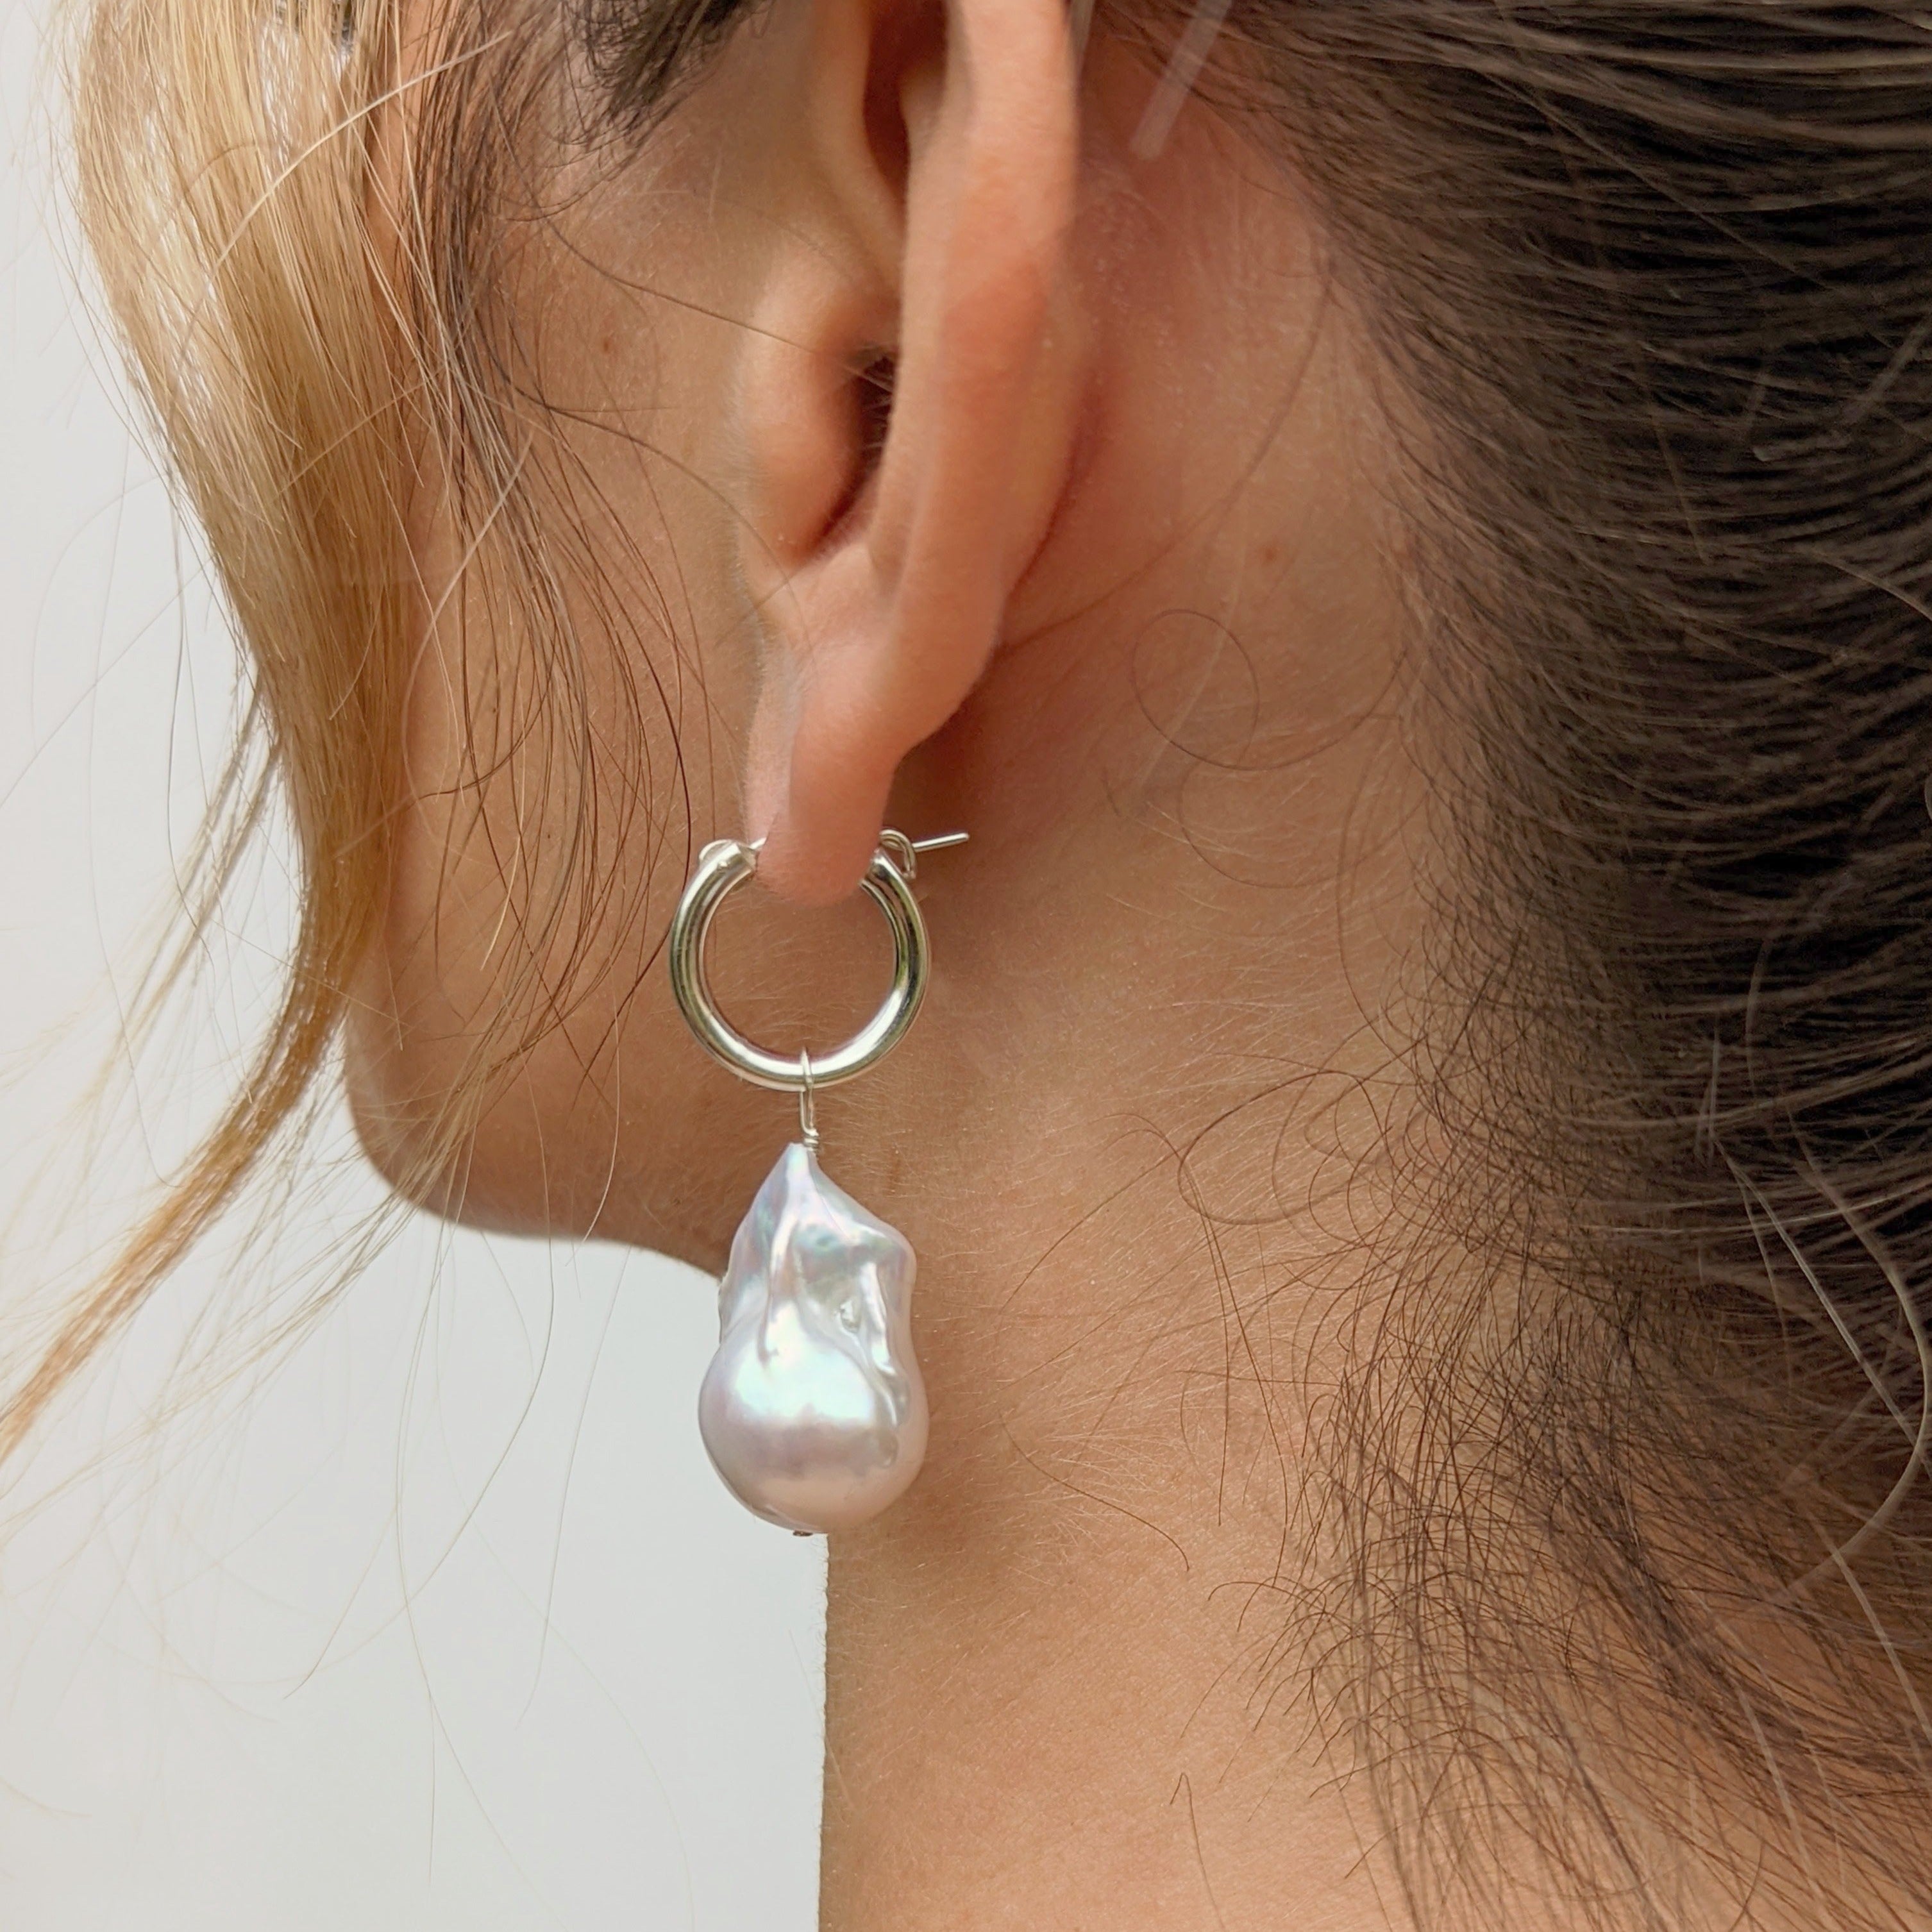 Large baroque pearl earring with sterling silver hoop